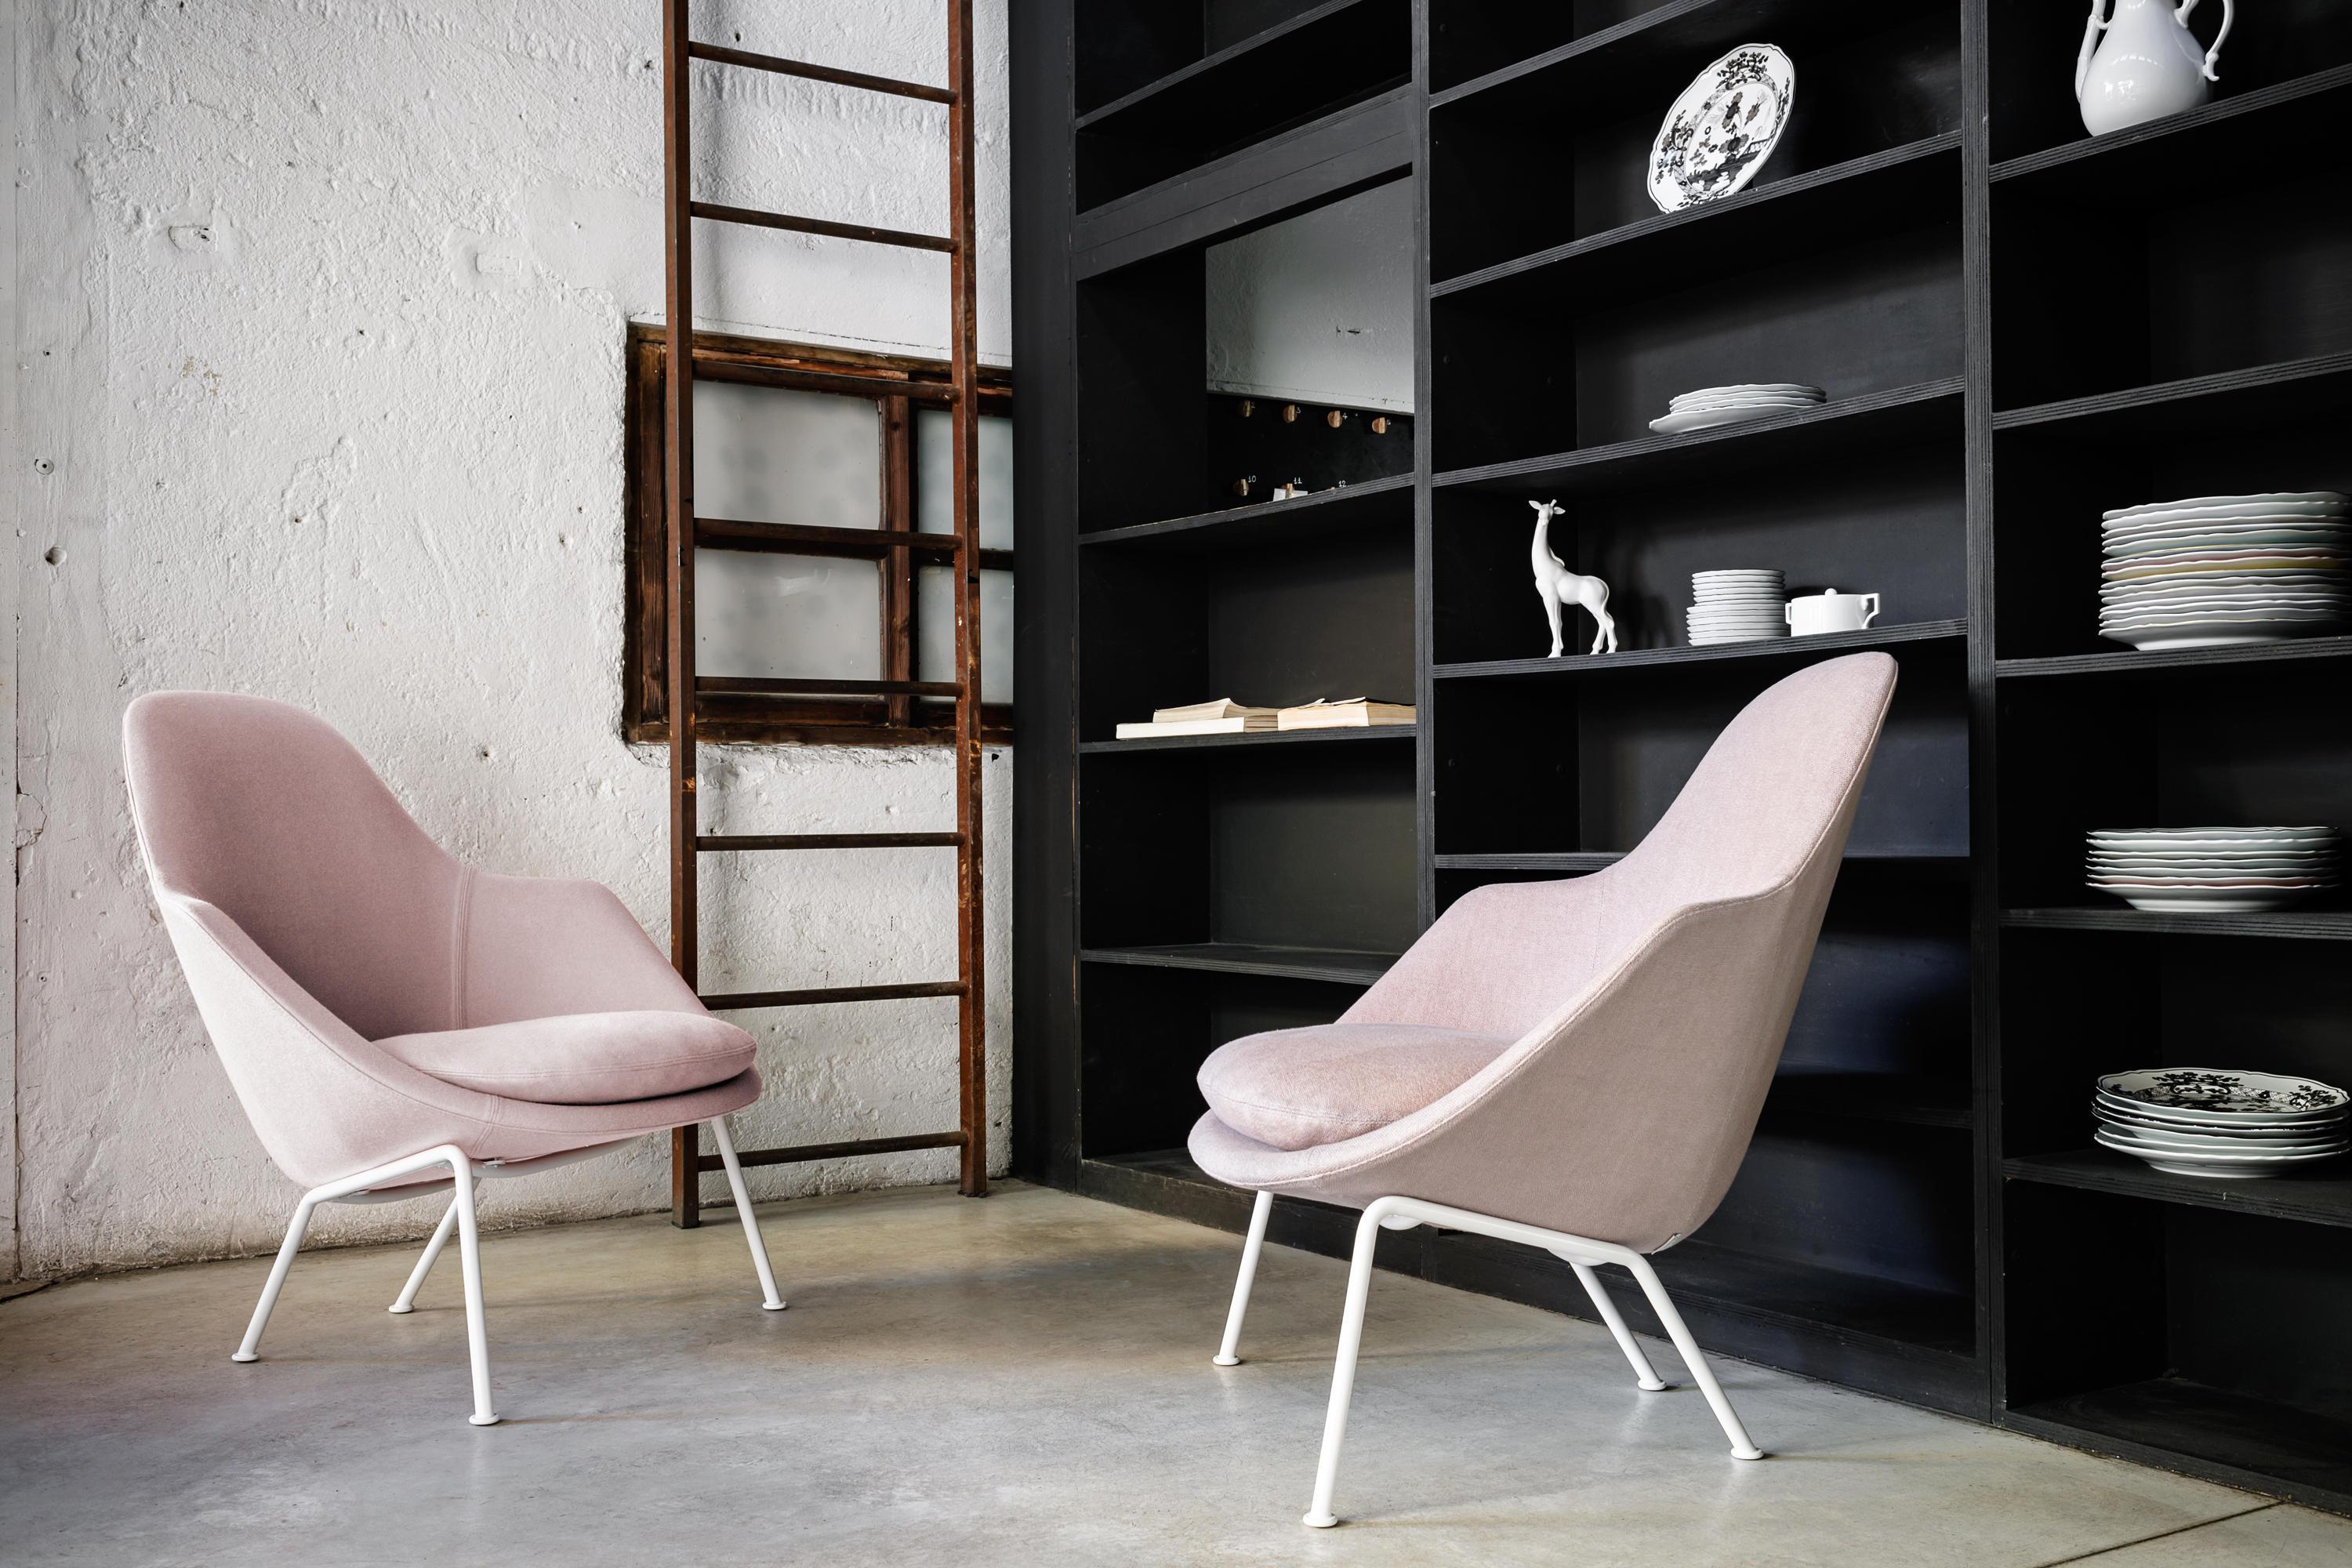 Dot armchair embraces the symbolic values of the ideal home and turns them into soft curves, embracing geometries, tactile feelings and simple lines. Its project is characterized by a unique and continuous shape, with a curved backrest which gently